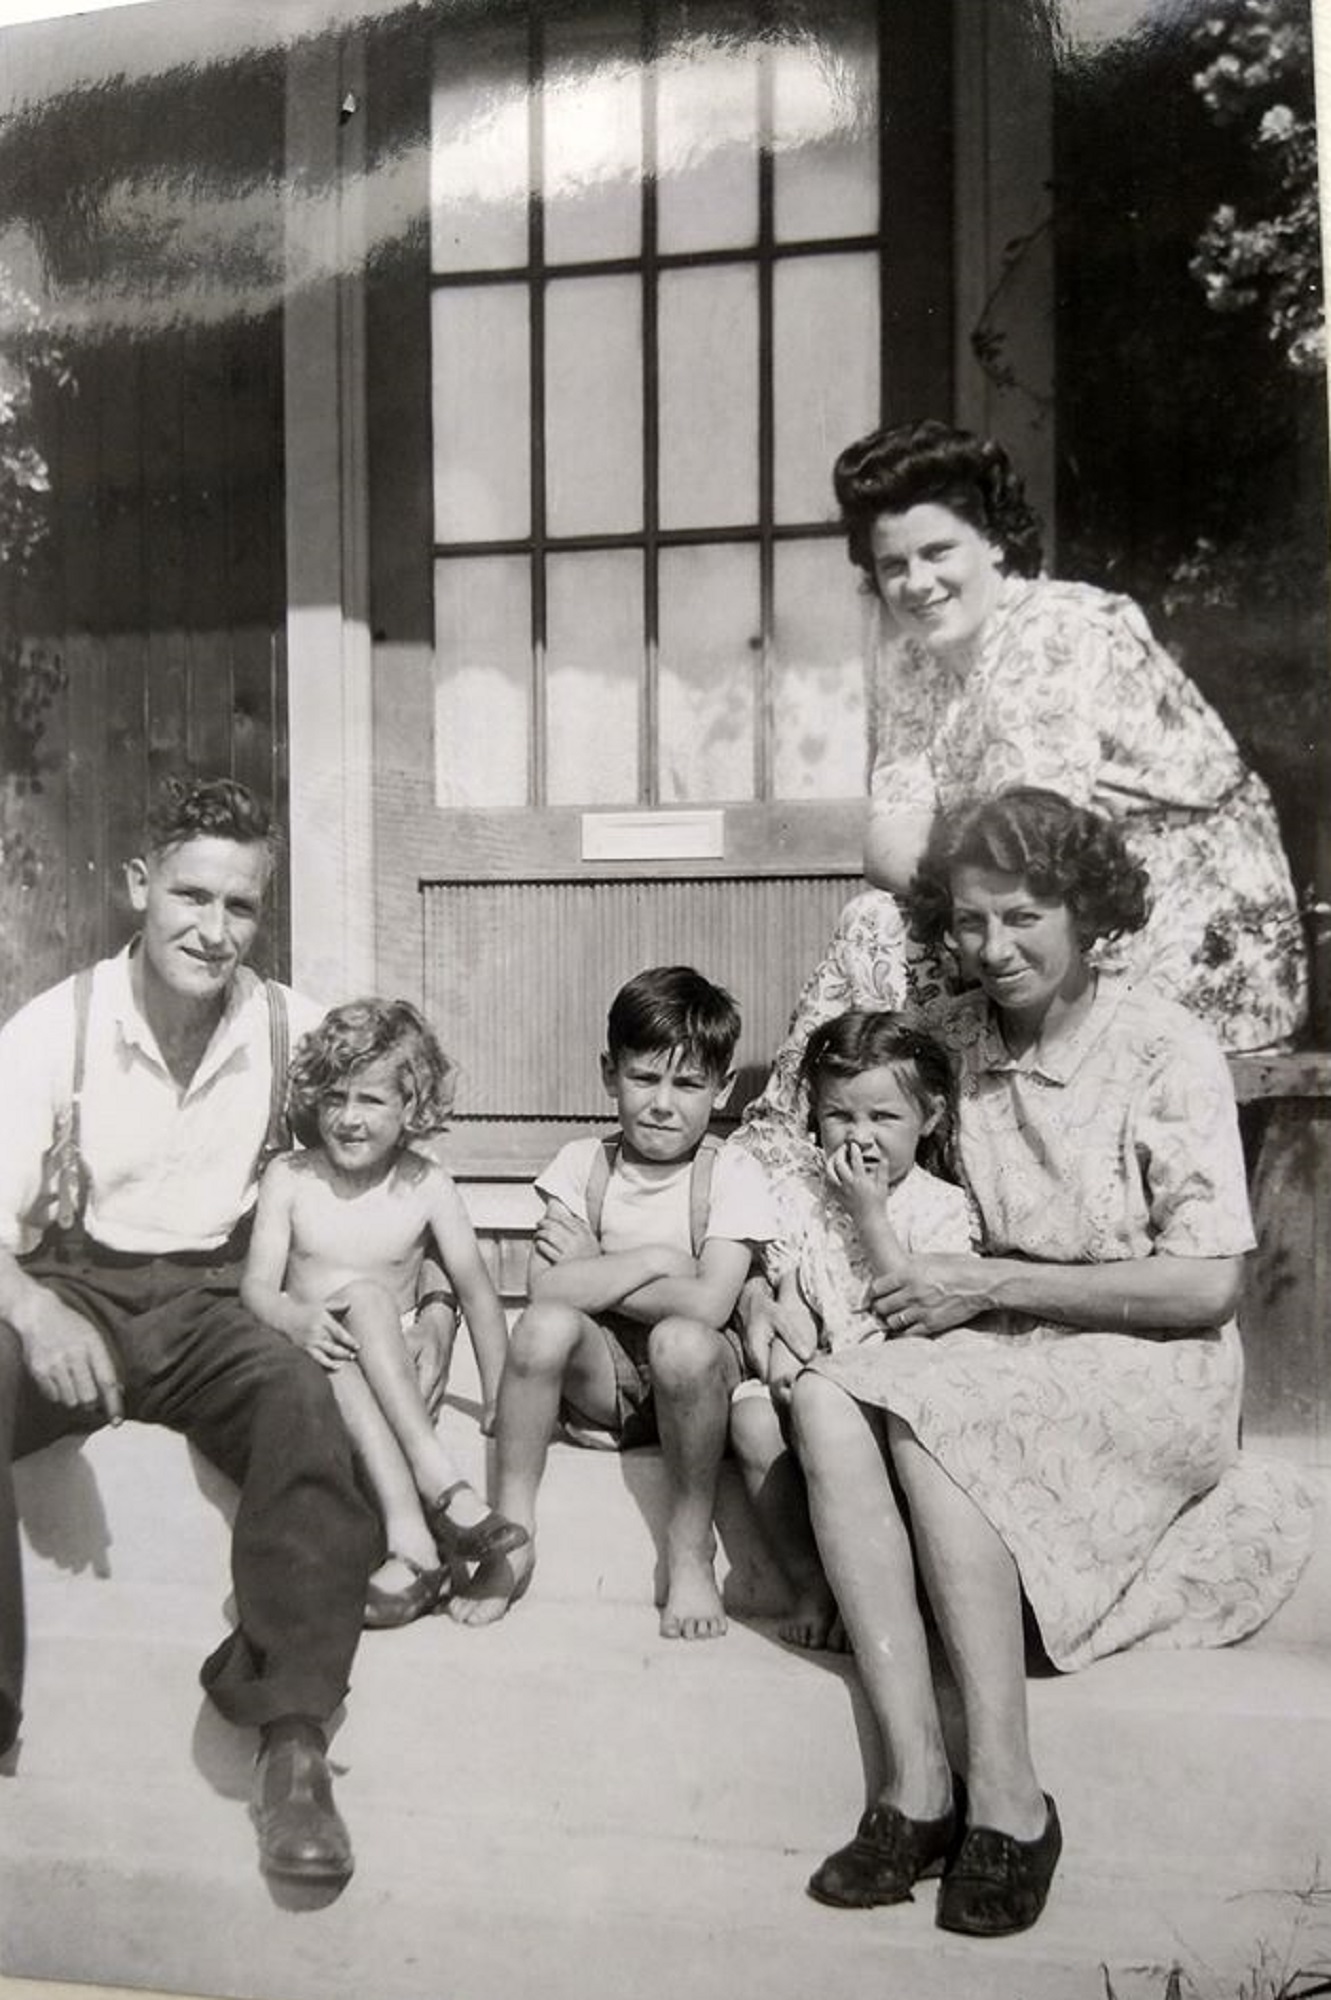 Three kids with Mum and Dad on the front porch. Swallow Street, Iver Heath, Buckinghamshire